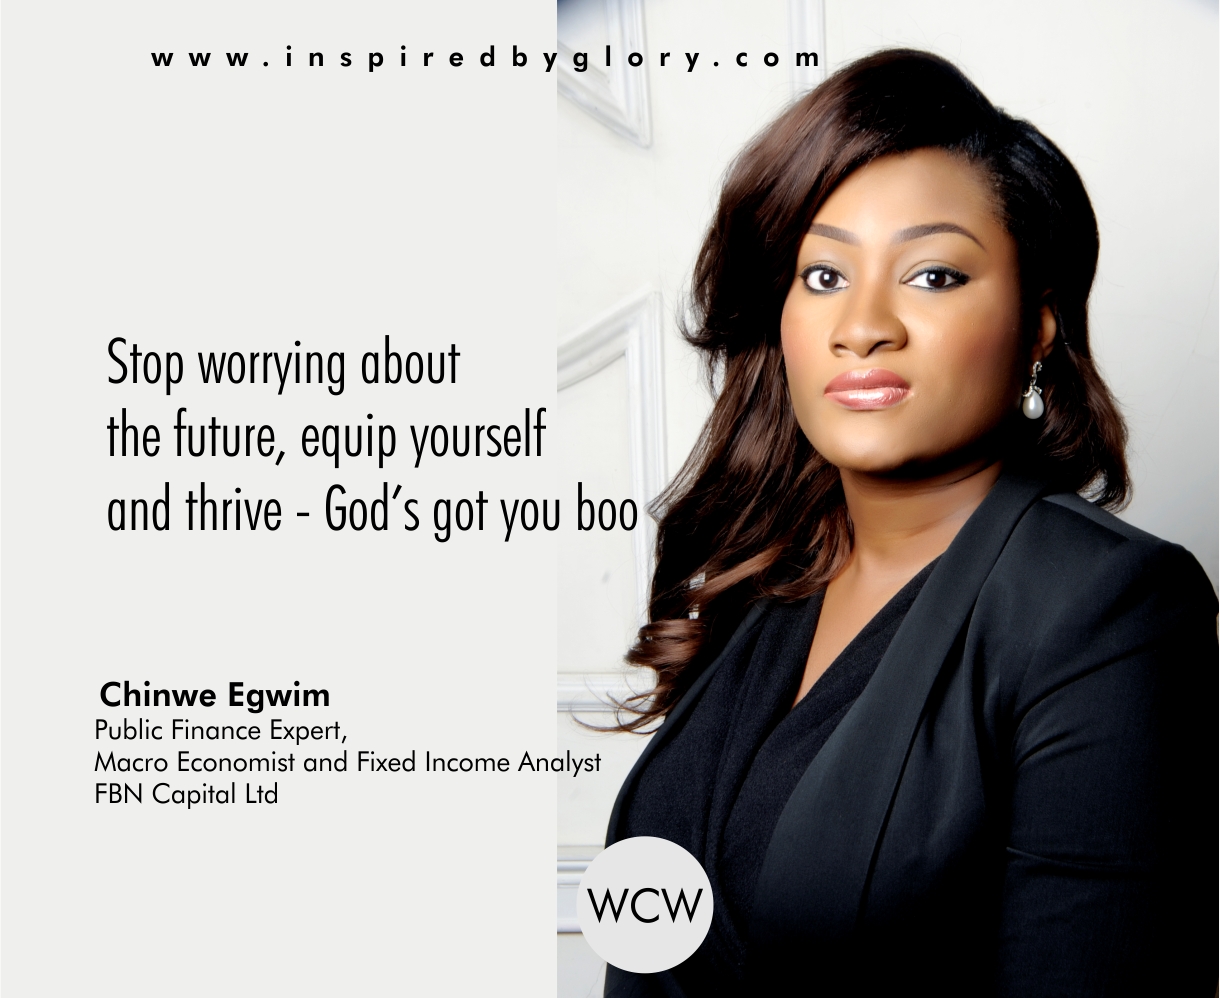 #WCW – Chinwe Egwin, a Public Finance Expert, Macro Economist, and Fixed Income Analyst